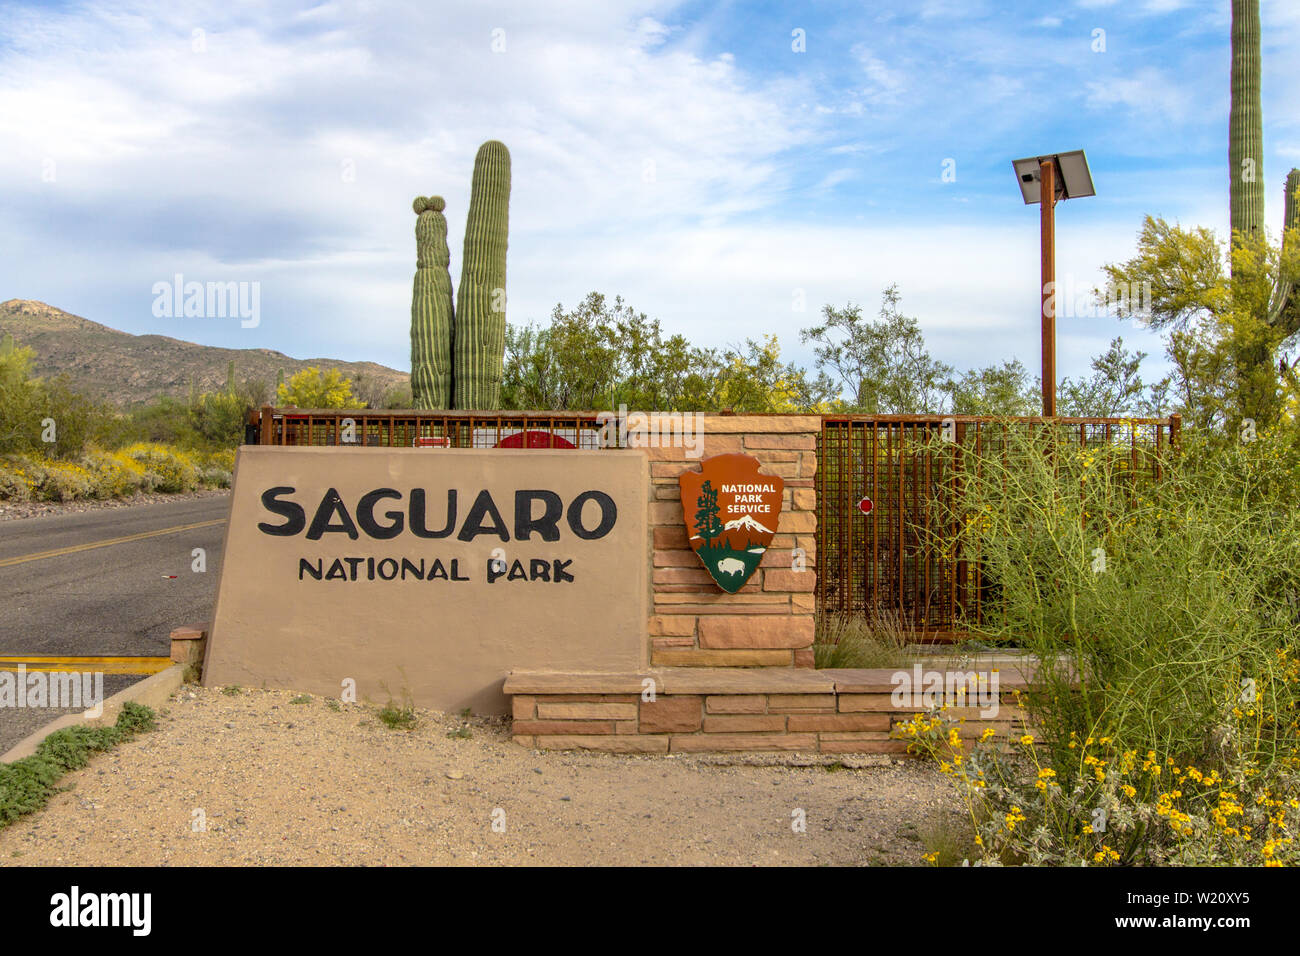 Entrance sign to the Saguaro National Park in Tucson. The Sonoran Desert in Arizona is the only place in the world where the Saguaro cactus can grow. Stock Photo